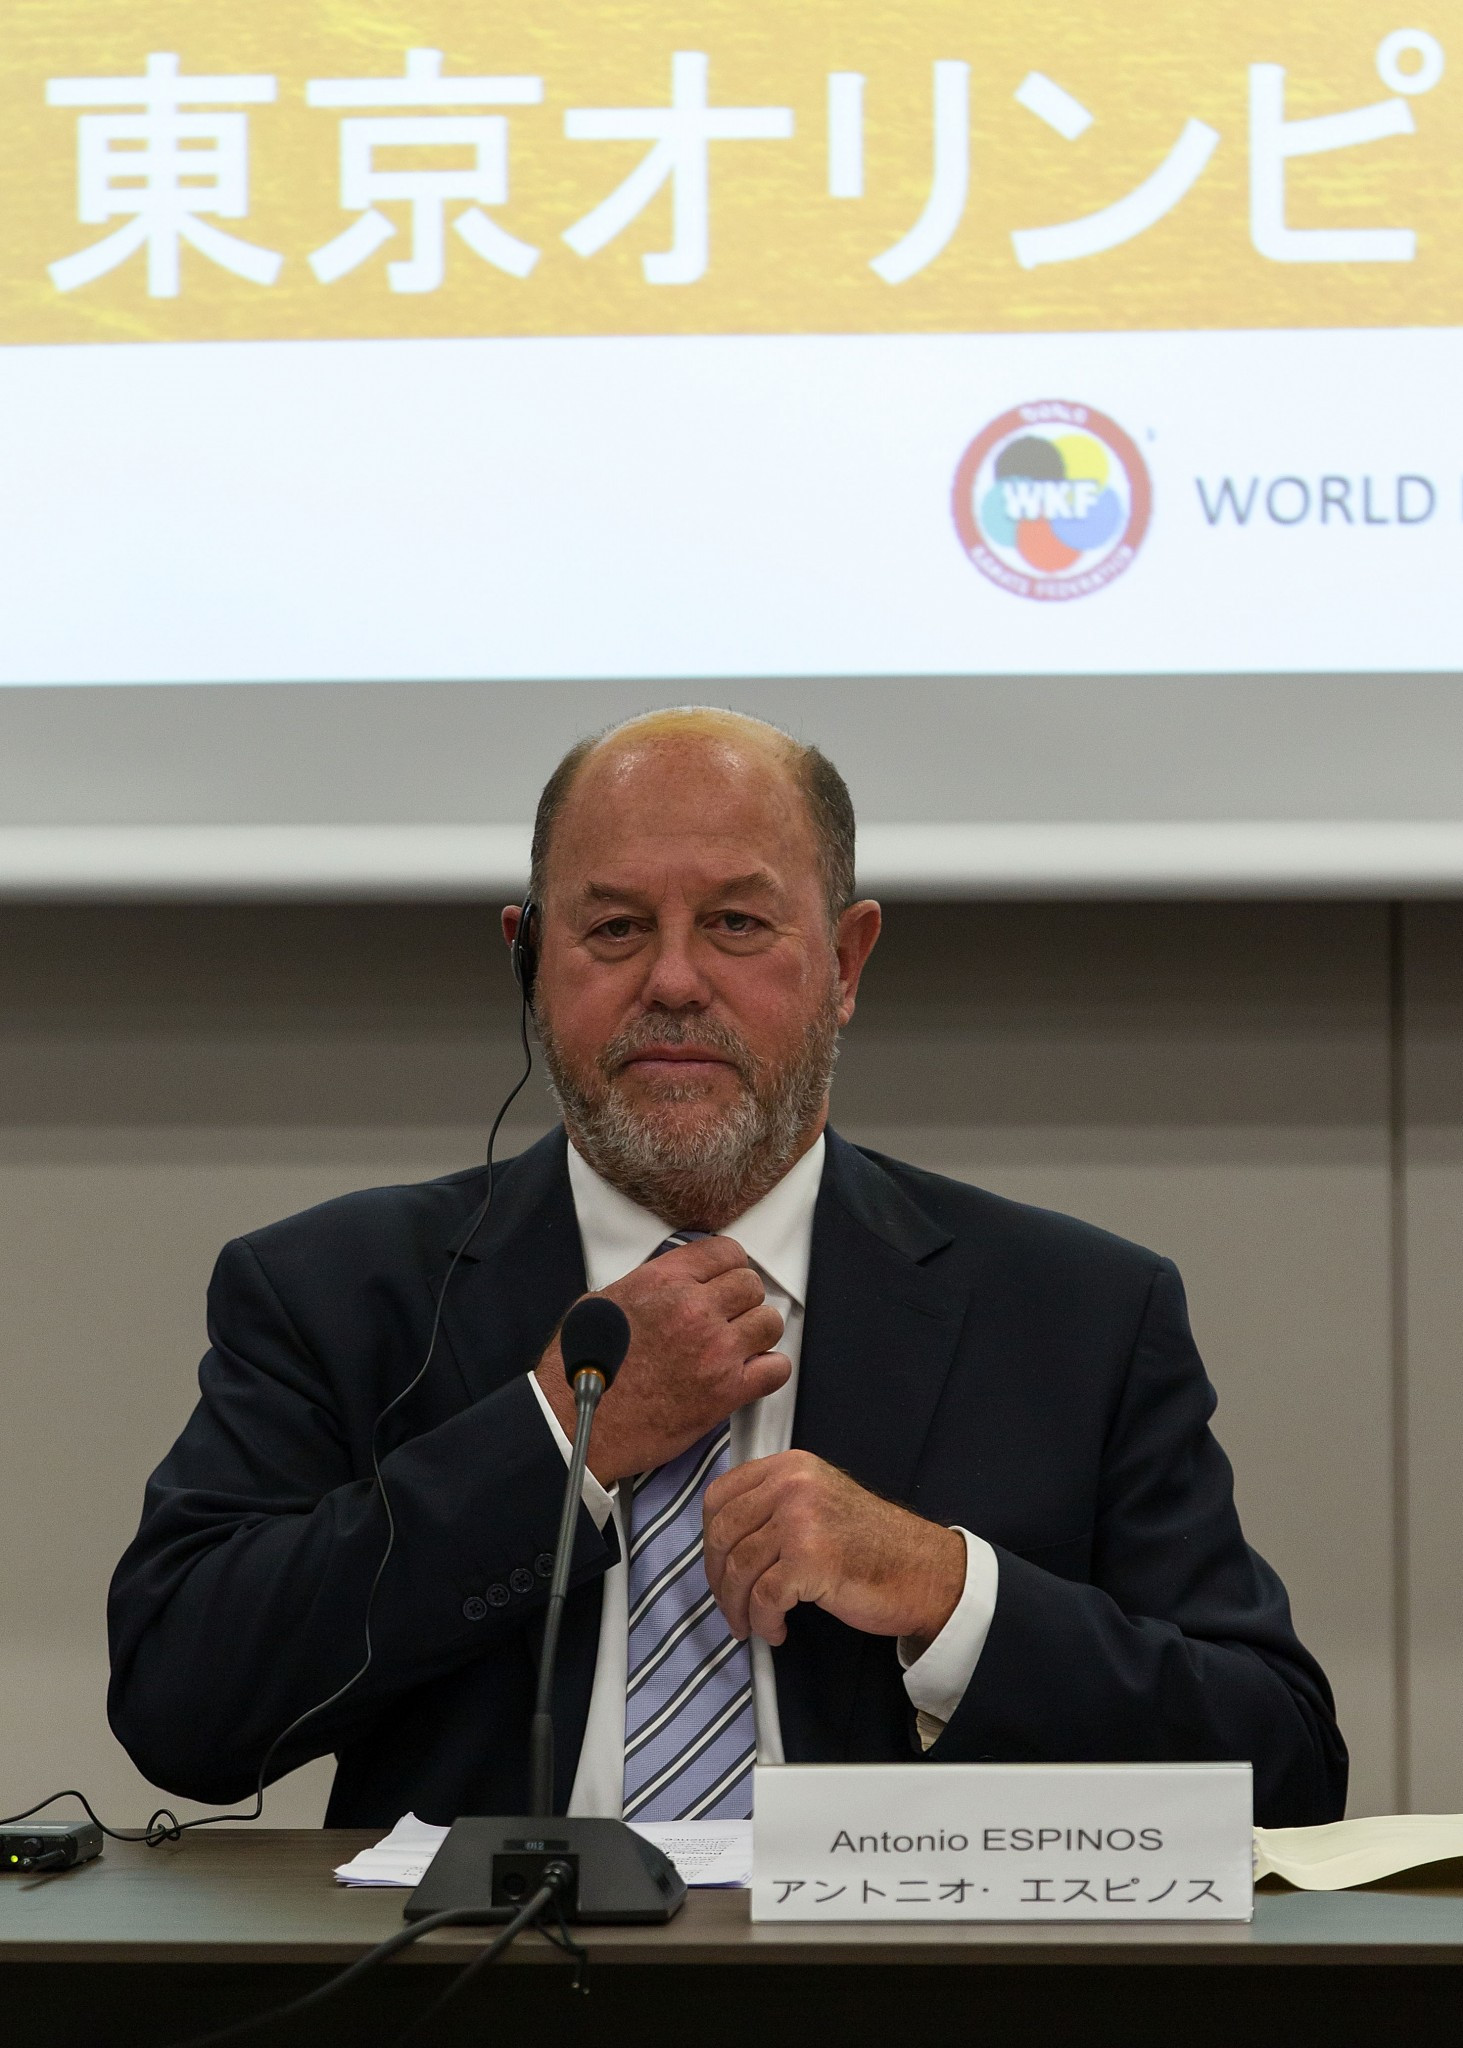 WKF President hails increase in participants since Olympic acceptance